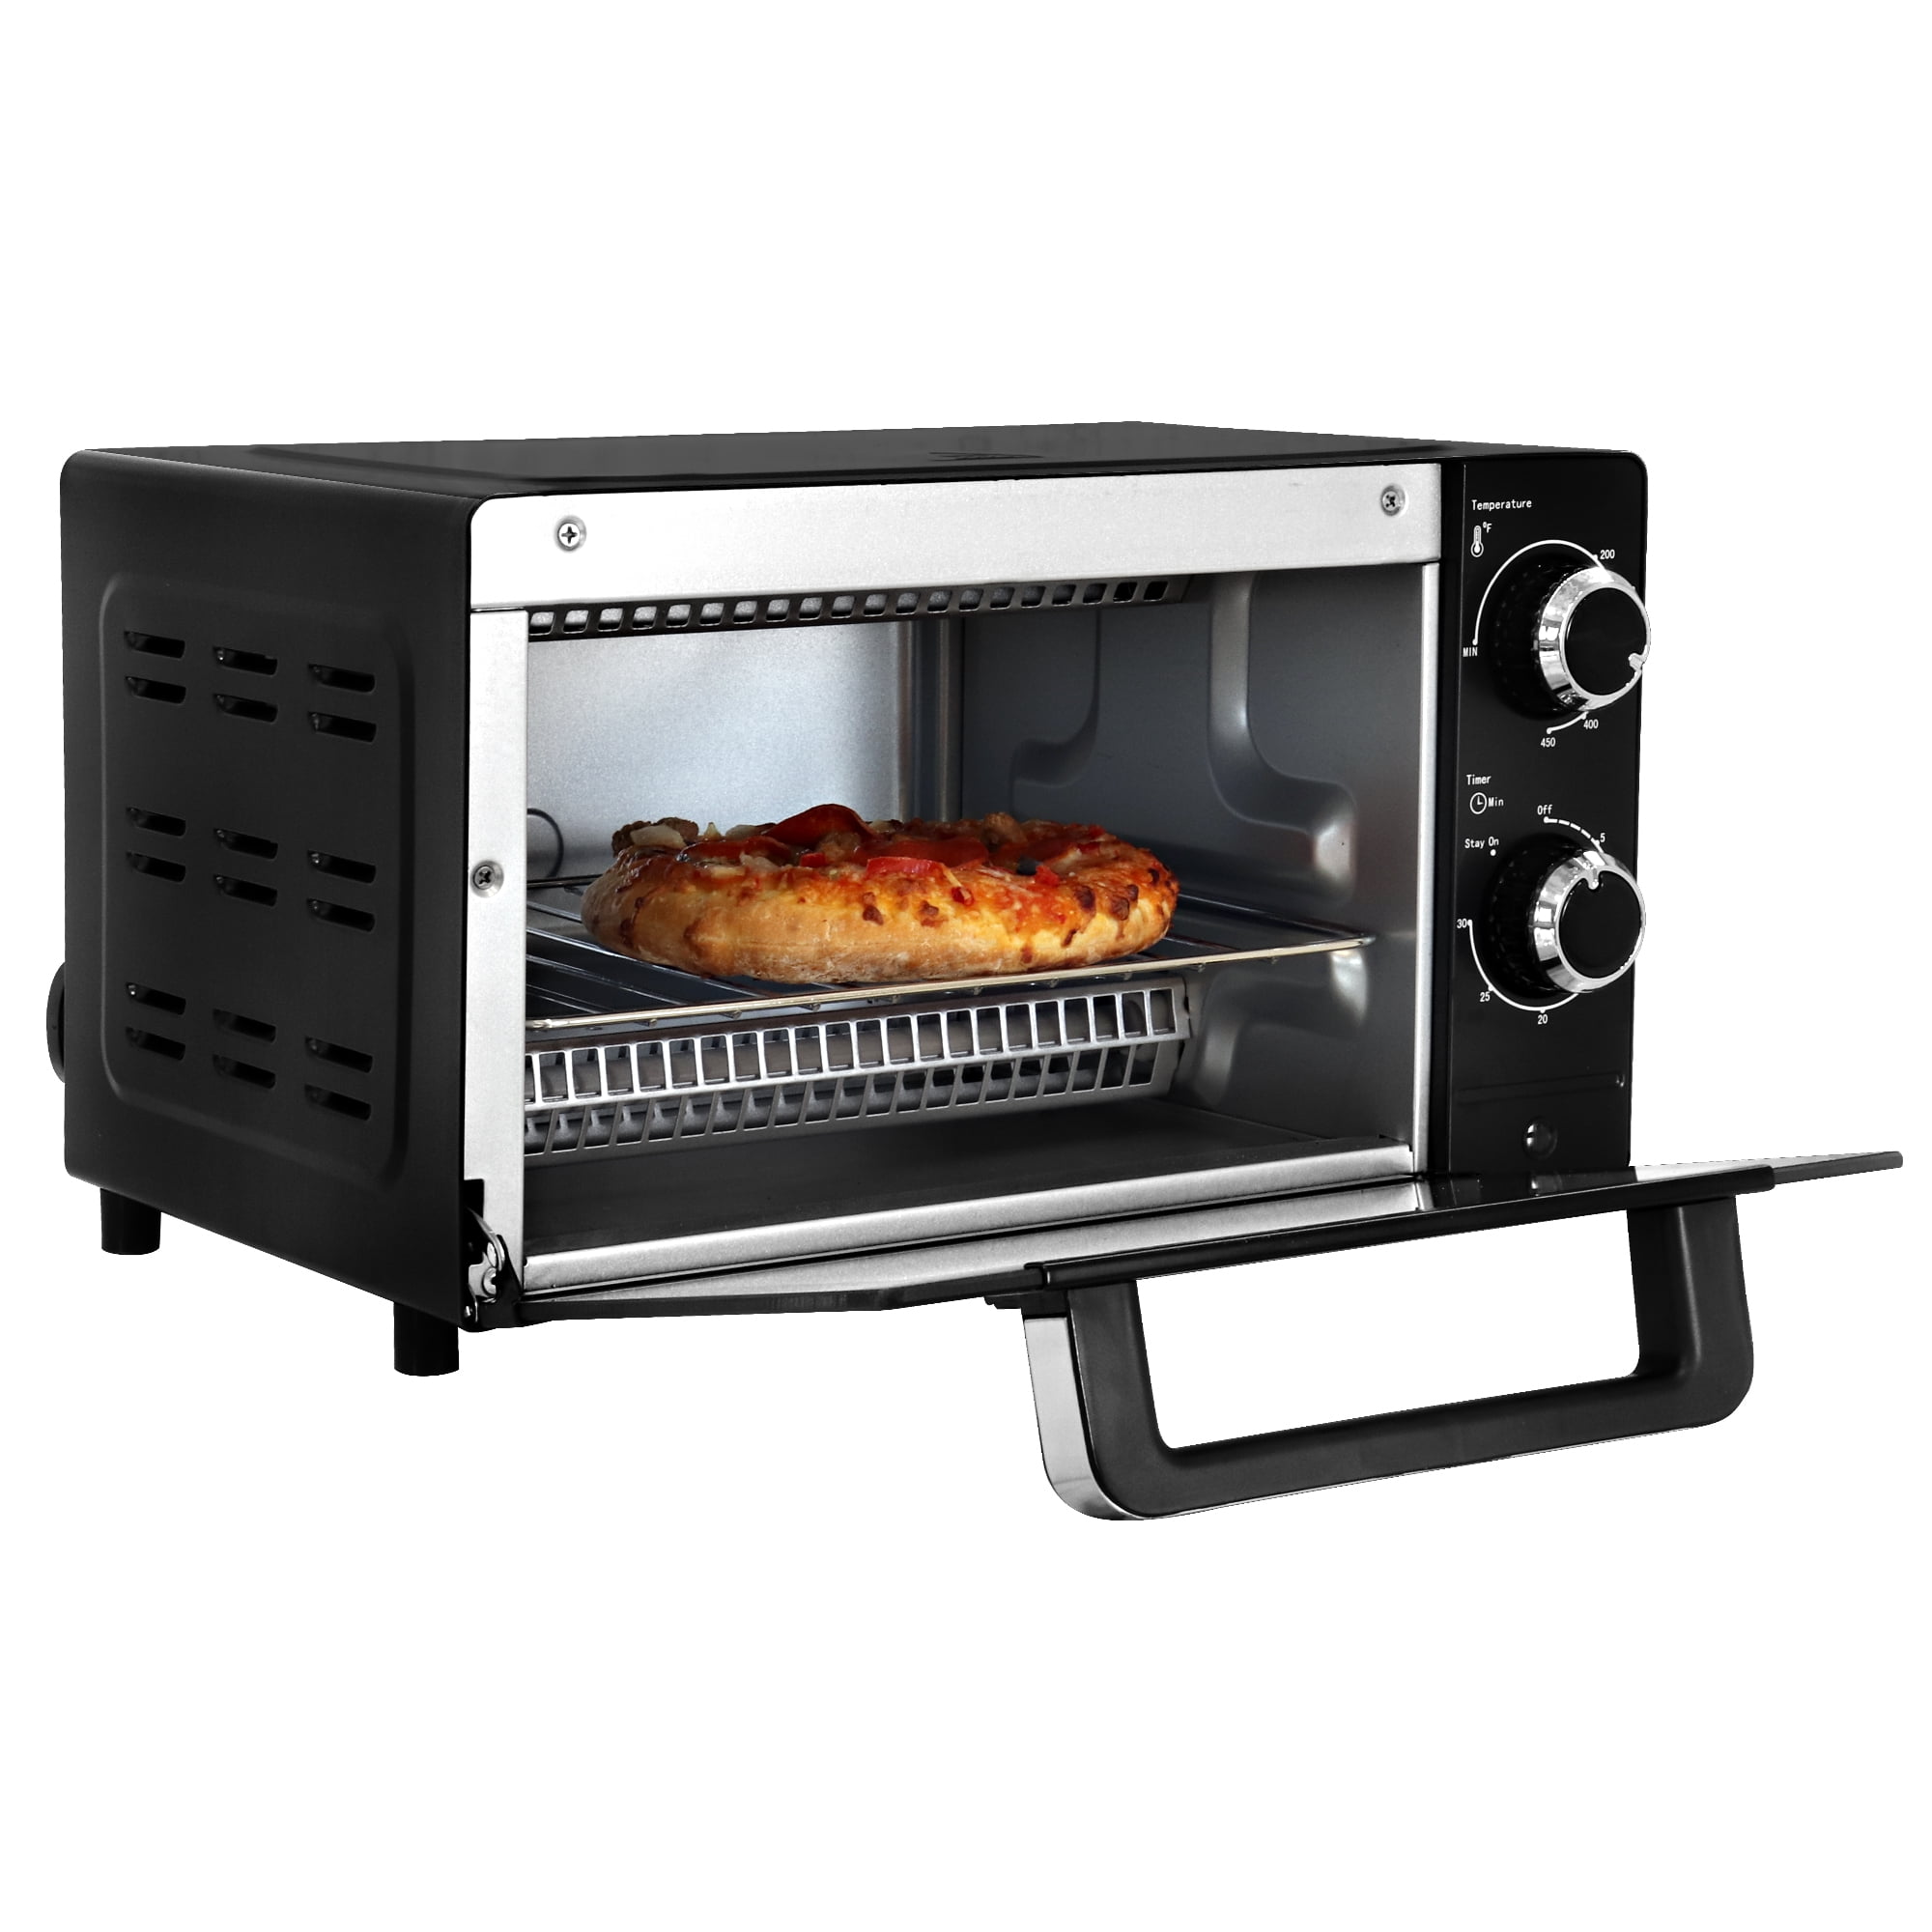 Black+Decker™ 4-Slice Countertop Toaster Oven - household items - by owner  - housewares sale - craigslist